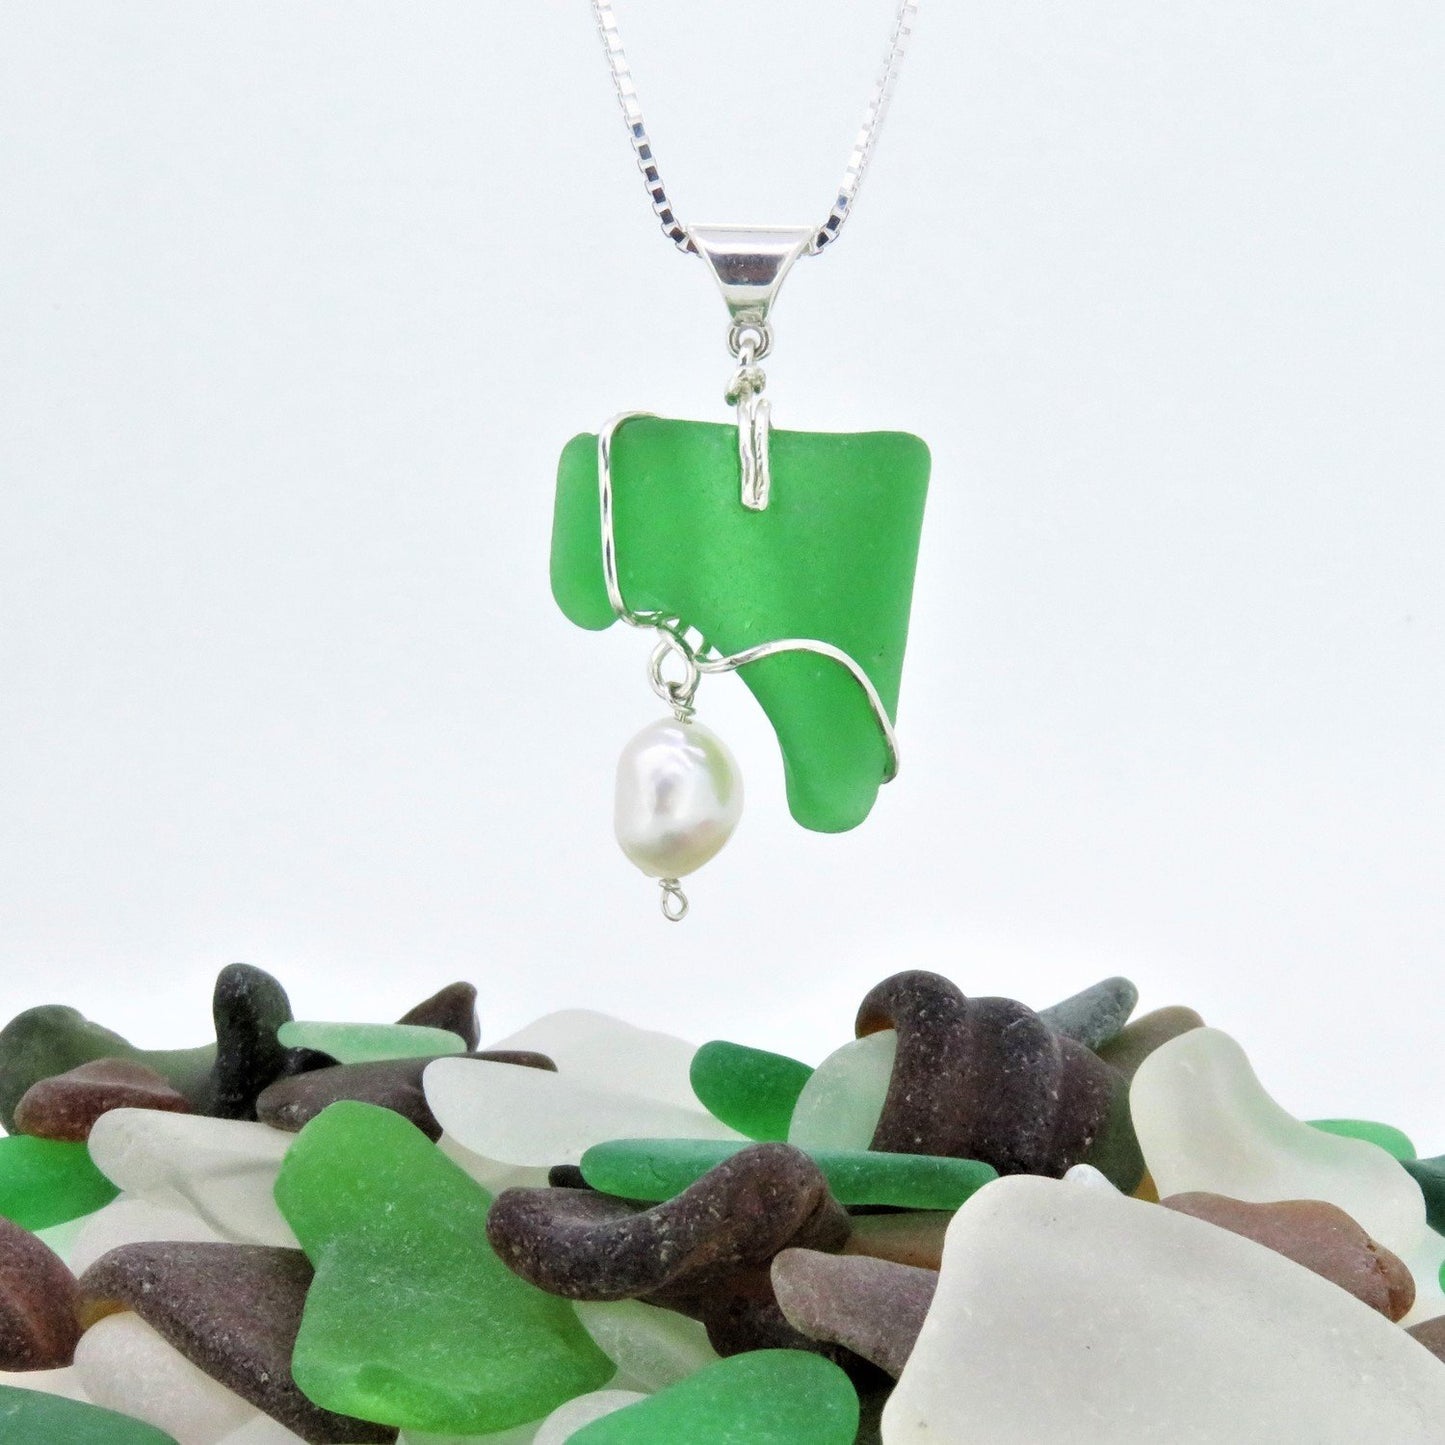 Green Seaglass Necklace with Pearl